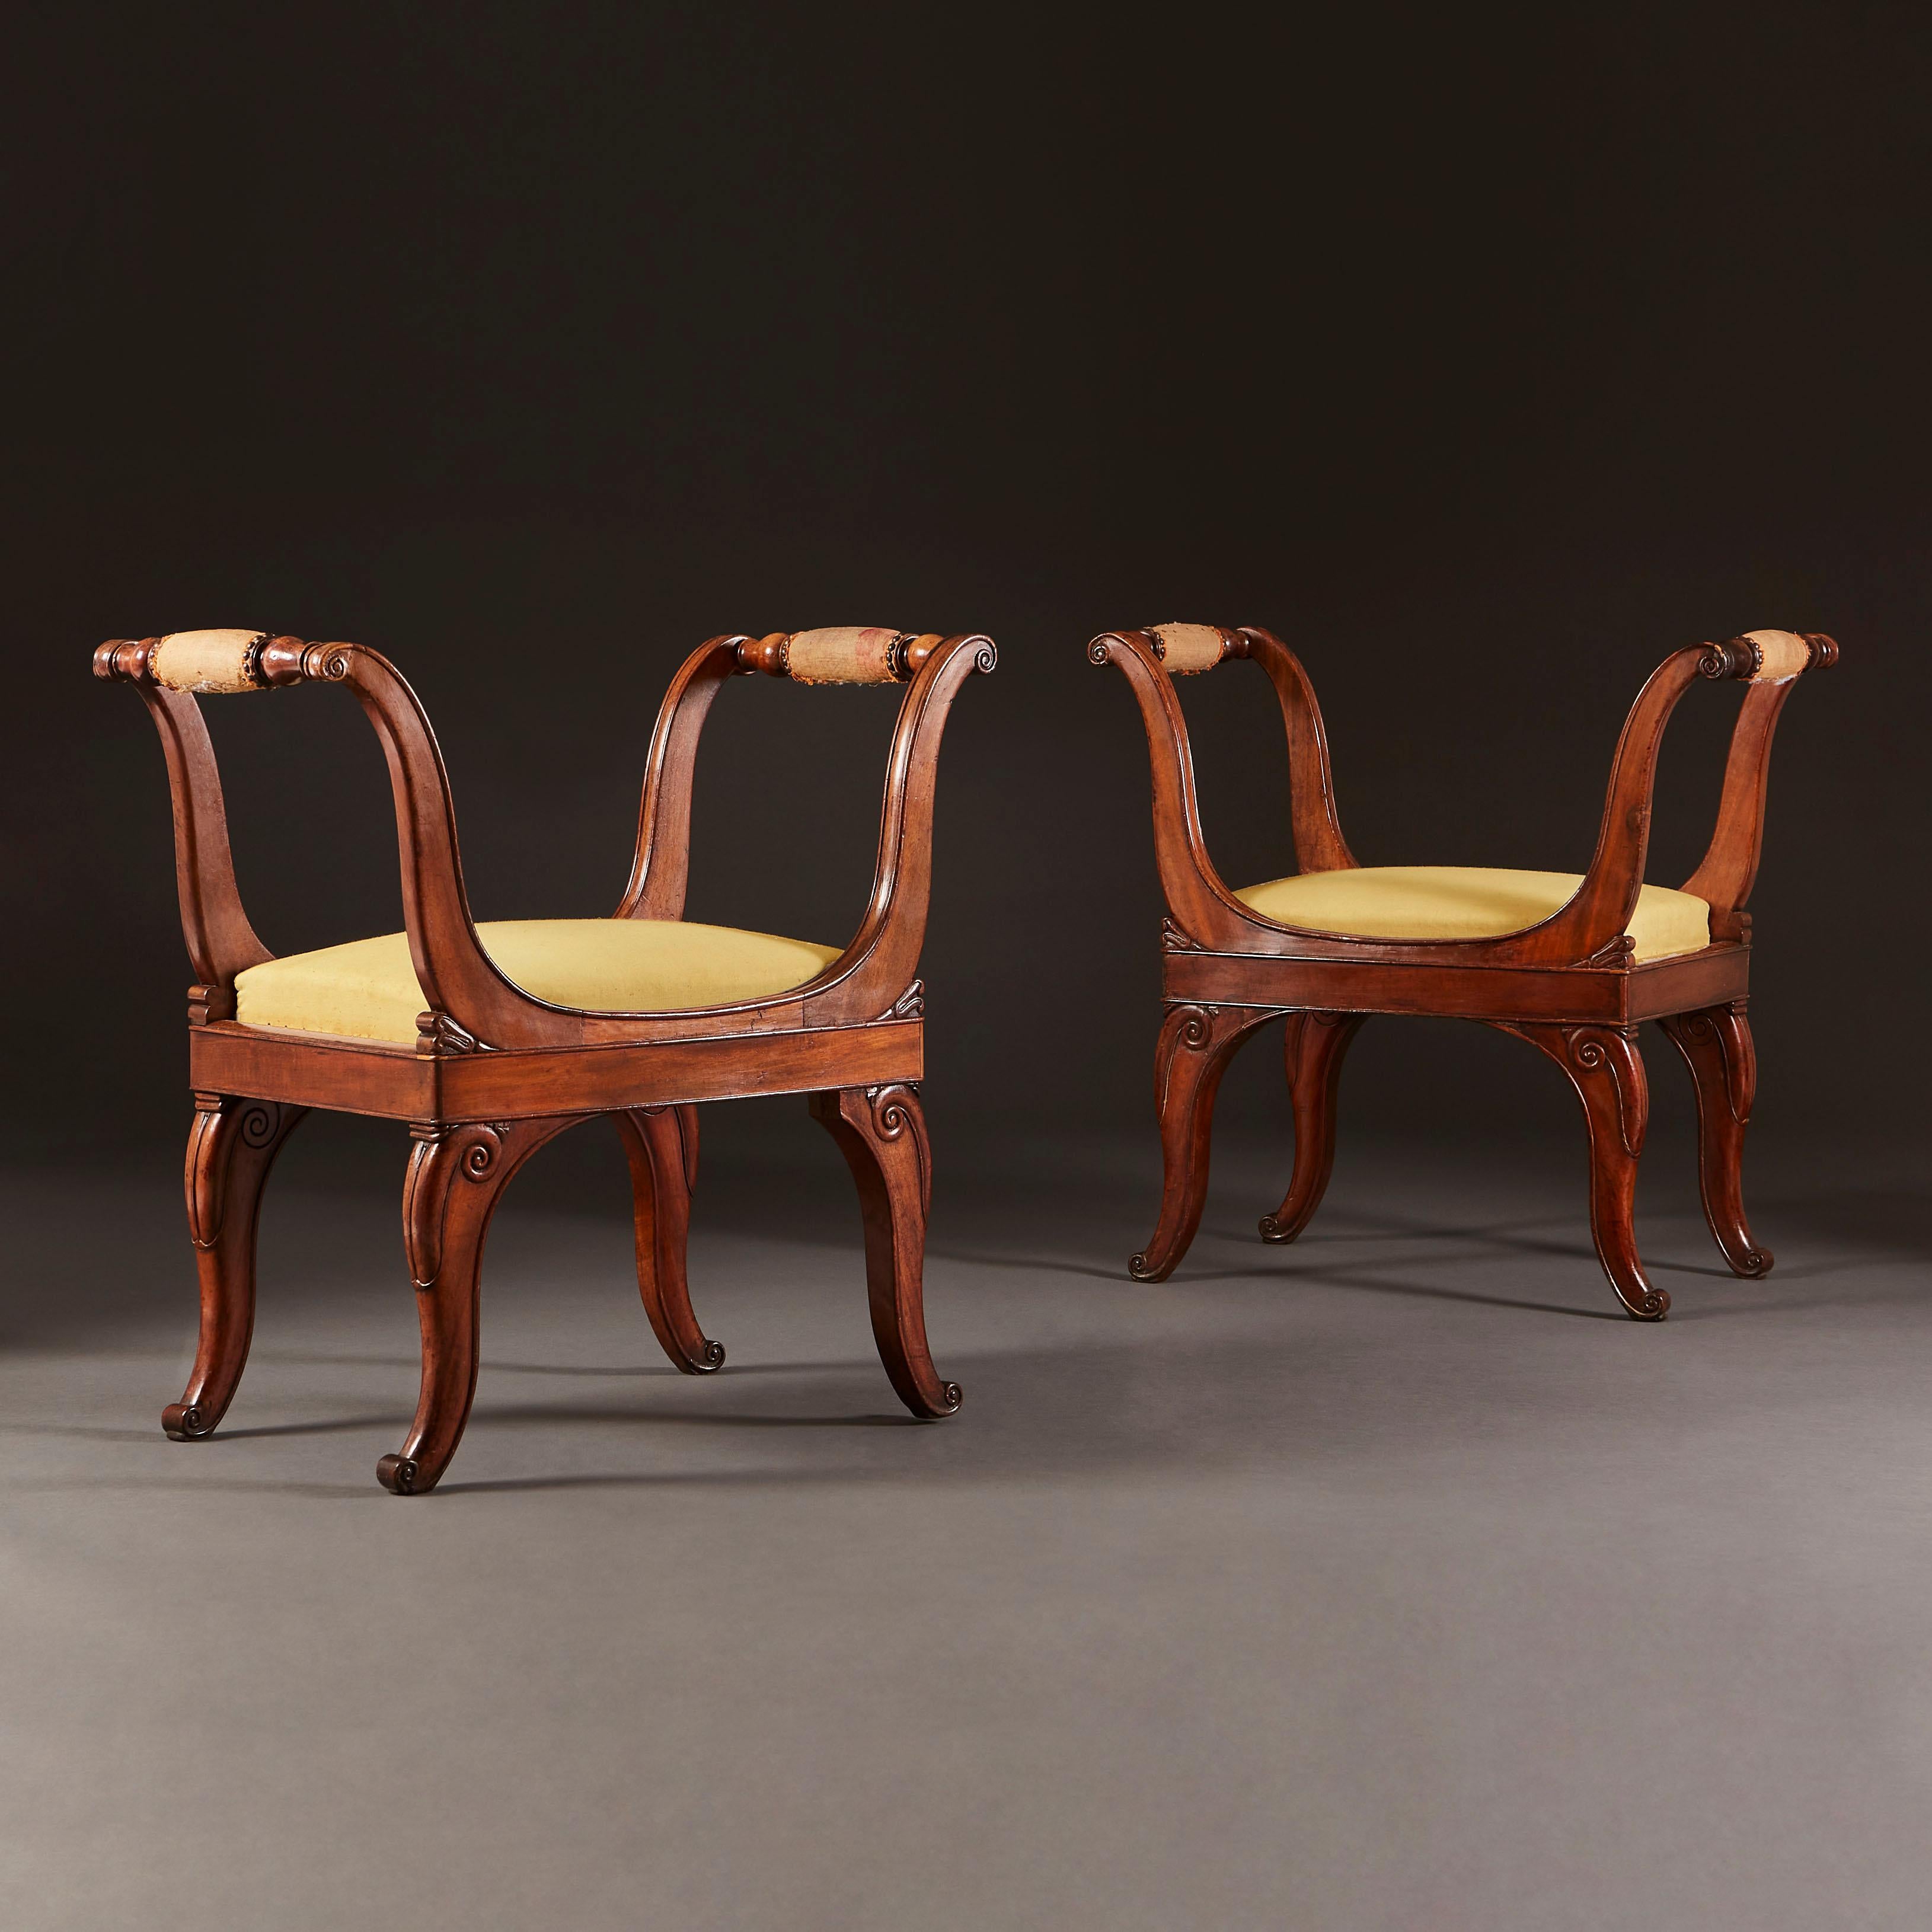 A fine pair of early nineteenth century mahogany stools with out swept arms, drop in seats, all supported on splayed legs.
    